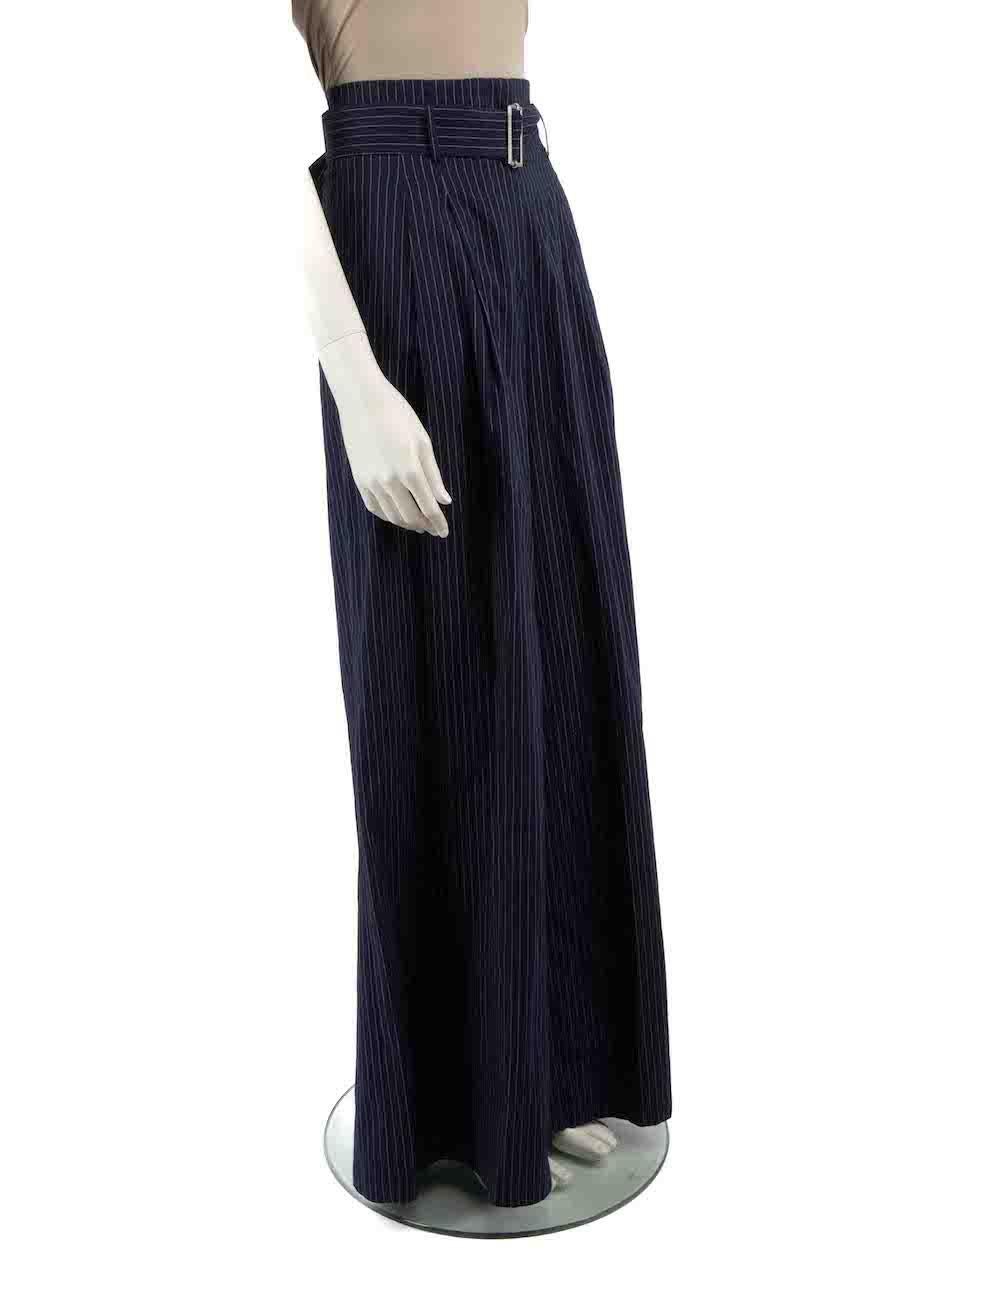 CONDITION is Very good. Hardly any visible wear to trousers is evident on this used Sea New York designer resale item.
 
 Details
 Navy
 Cotton
 Trousers
 Pinstripe pattern
 Wide leg
 High rise
 Belted
 2x Side pockets
 Zip fastening
 
 
 Made in